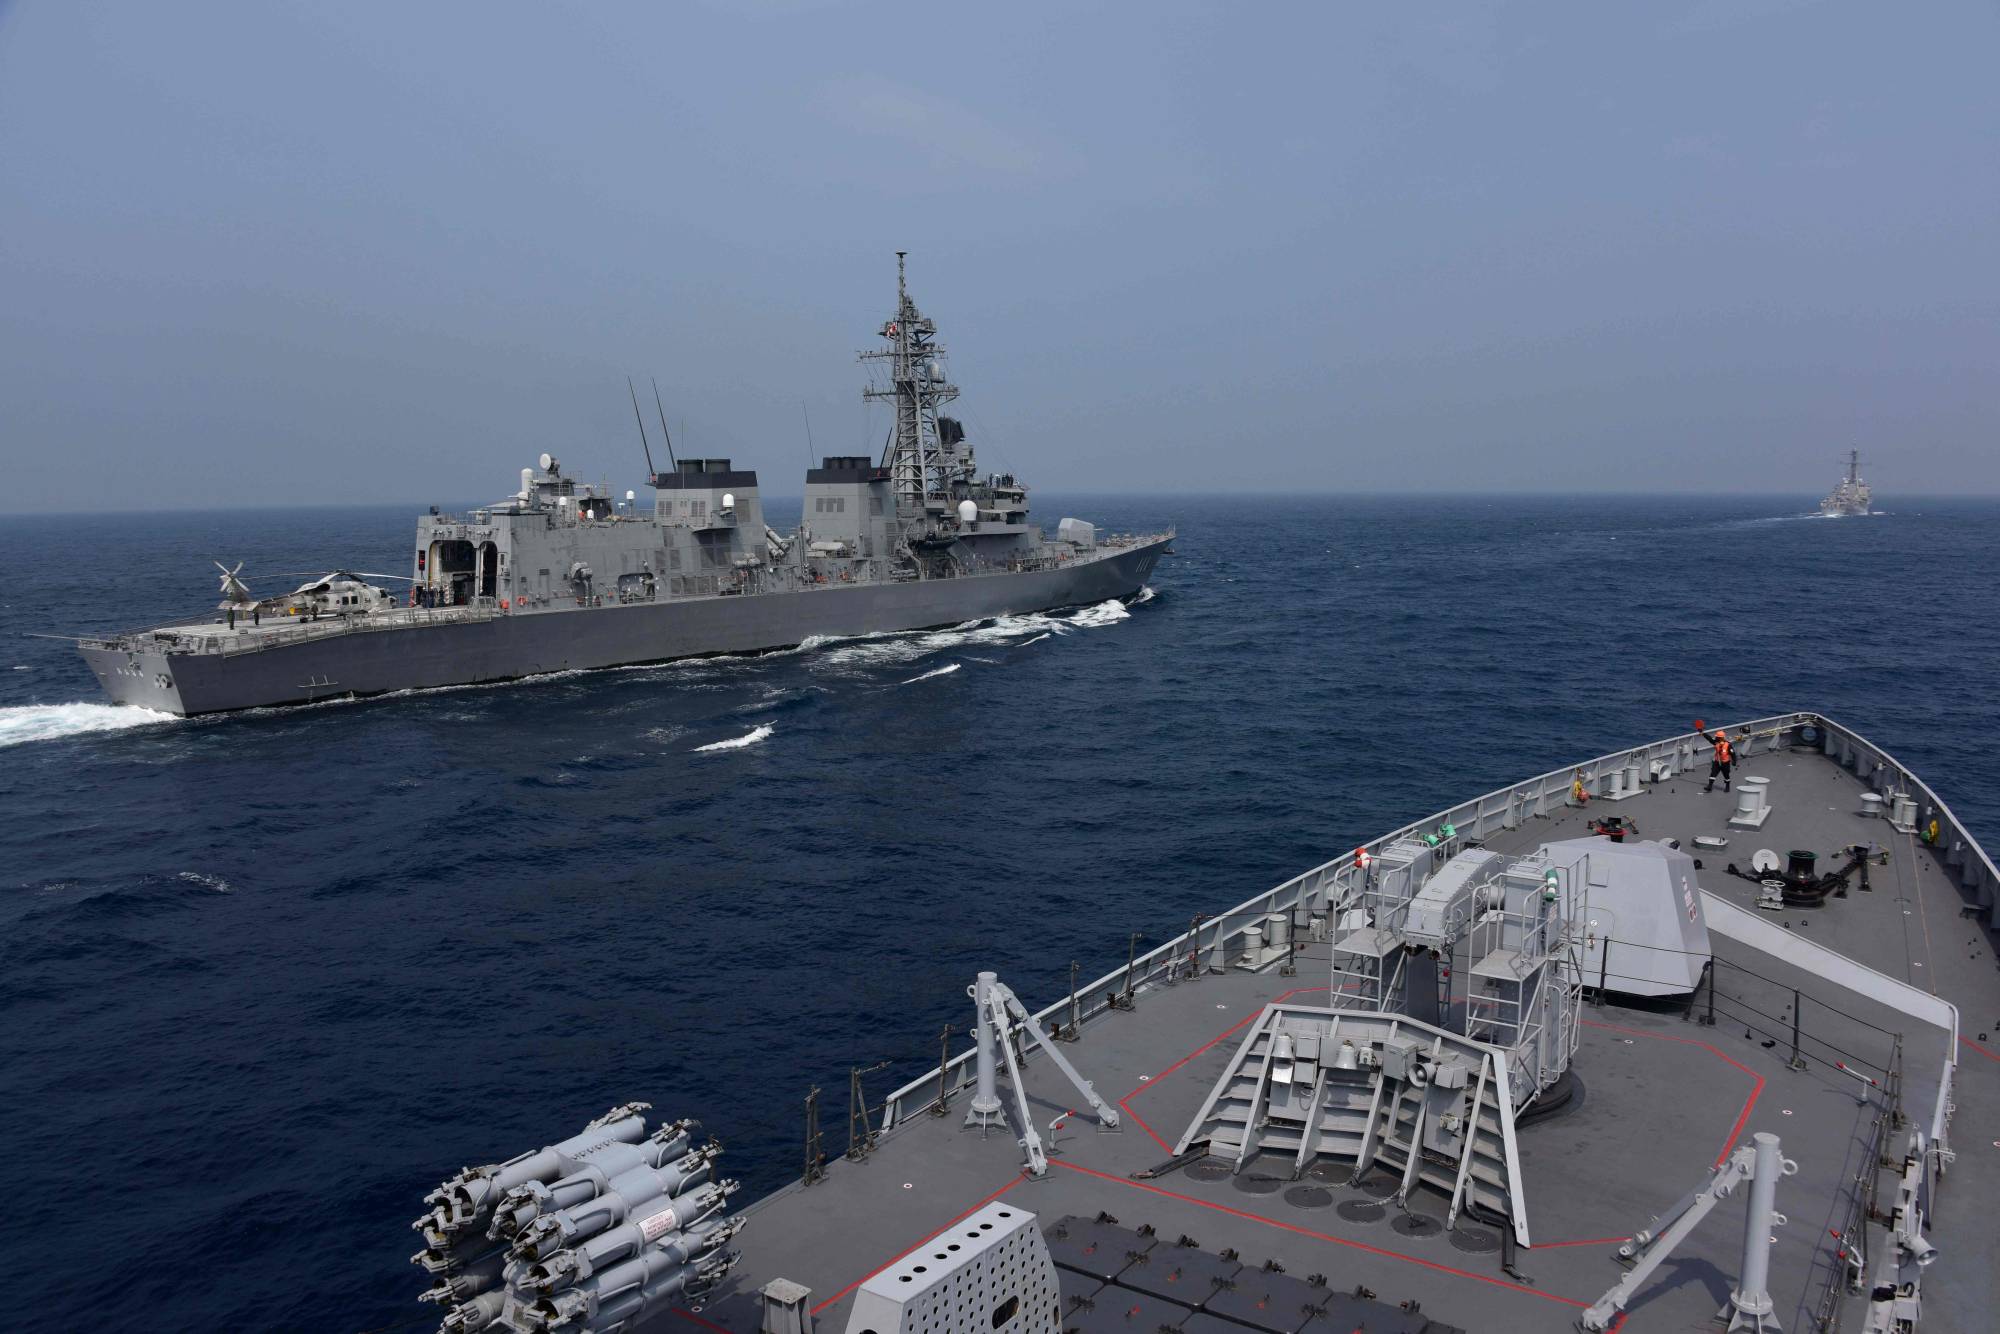 Naval vessels take part in the Malabar exercise in the Bay of Bengal on Tuesday. | INDIAN NAVY / VIA AFP-JIJI